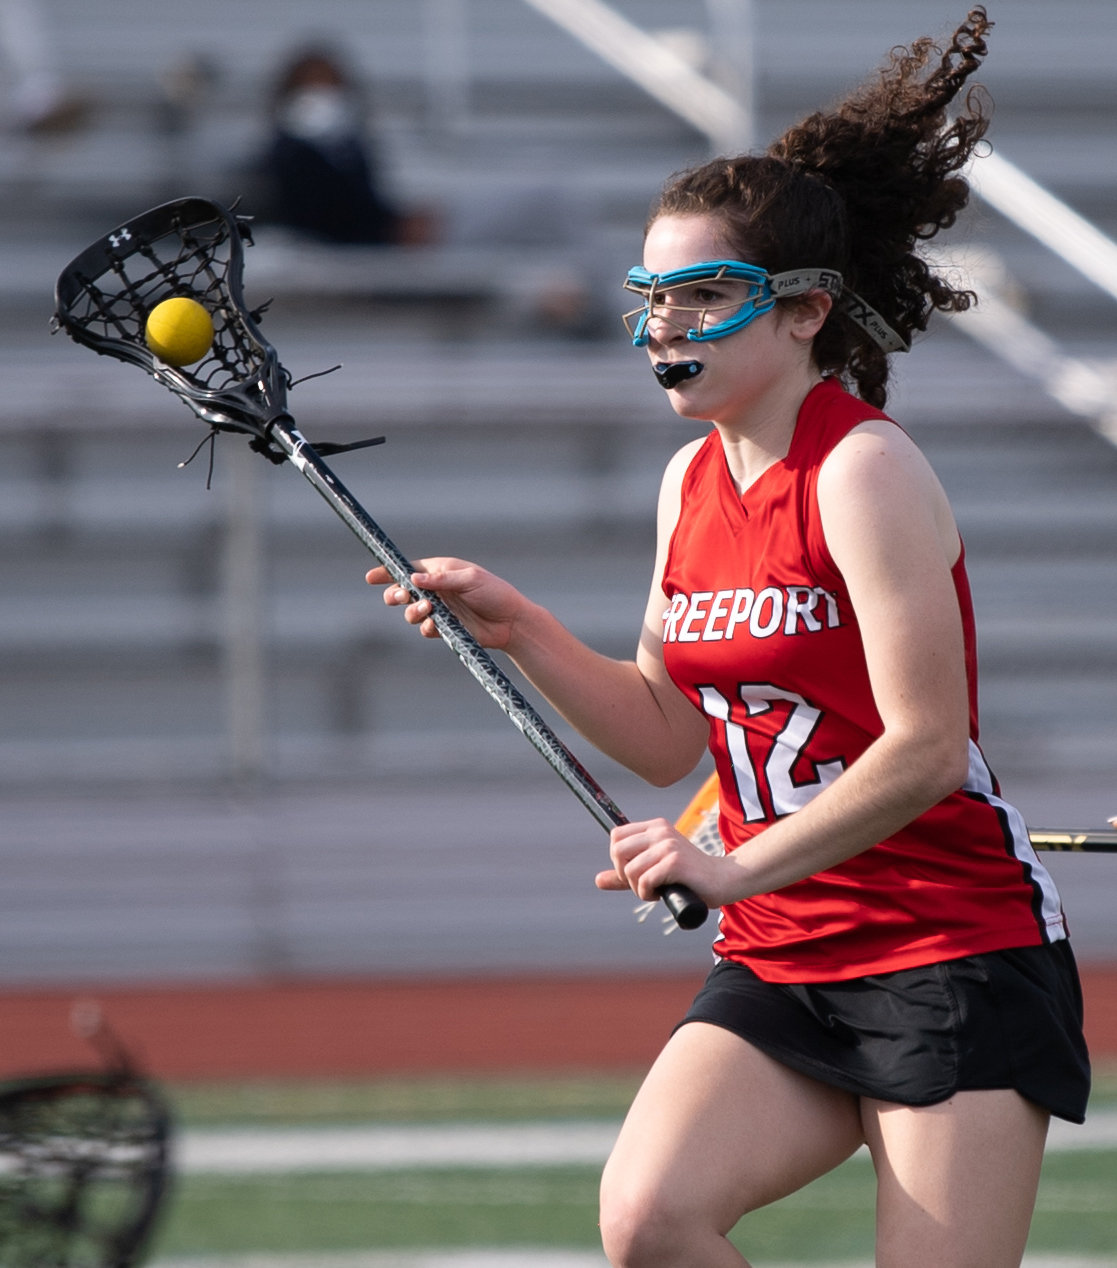 Sophomore Cassie Smith’s goal in double overtime completed a wild 9-8 comeback victory for Freeport over Elmont.